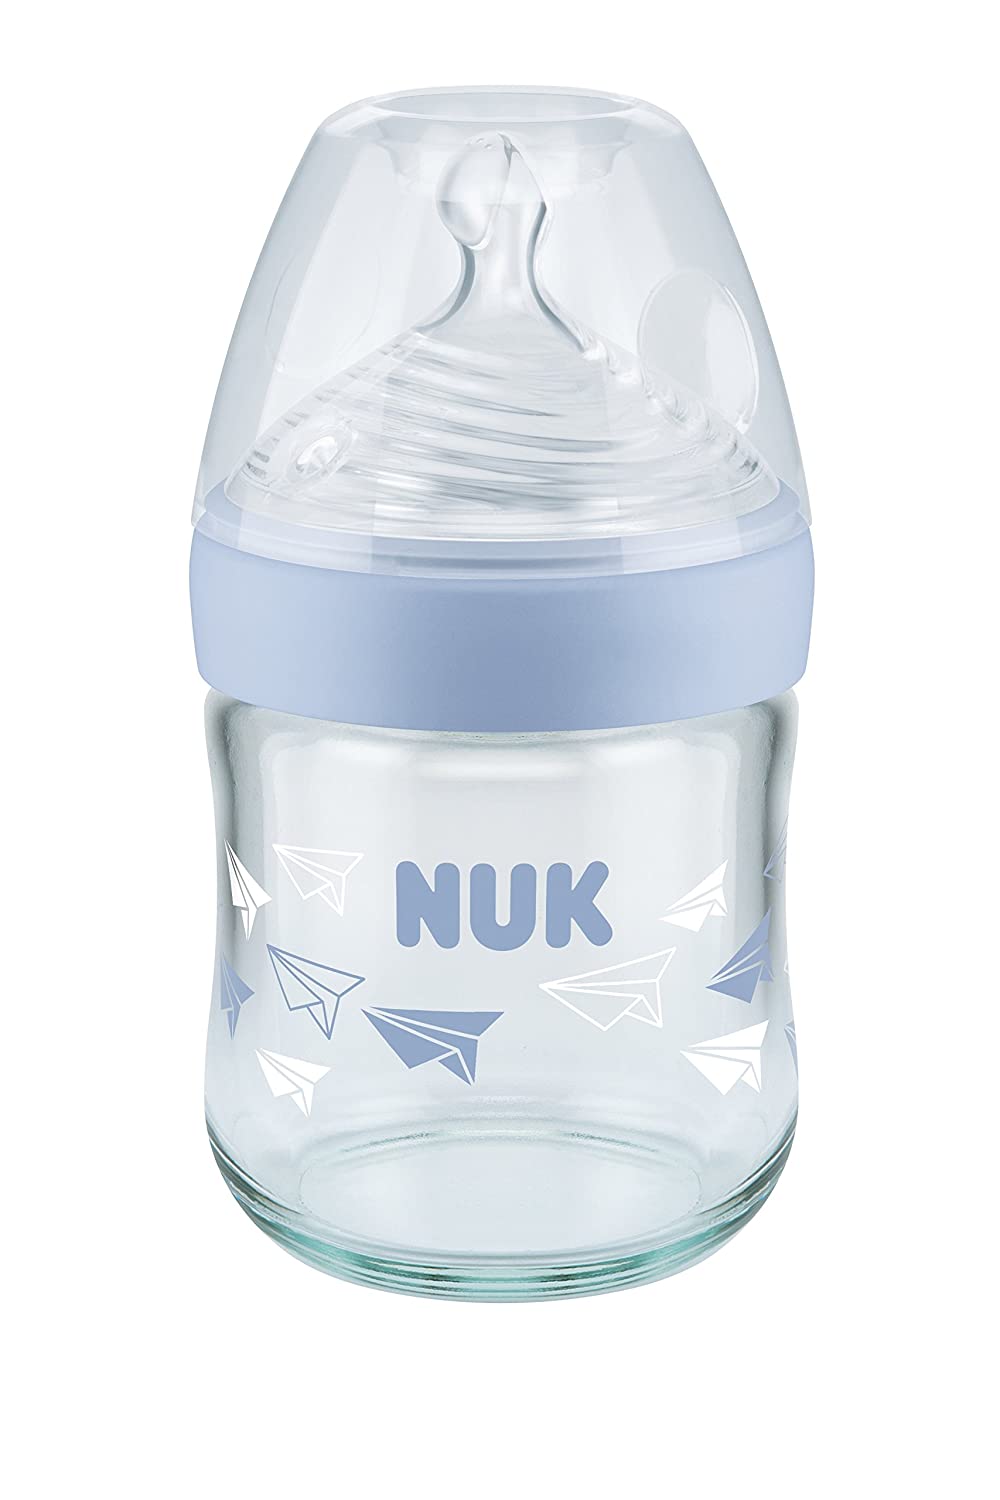 NUK Nature Sense Glass Baby Bottle 0-6 Months Breast-like Silicone Teat, 120 ml, Blue